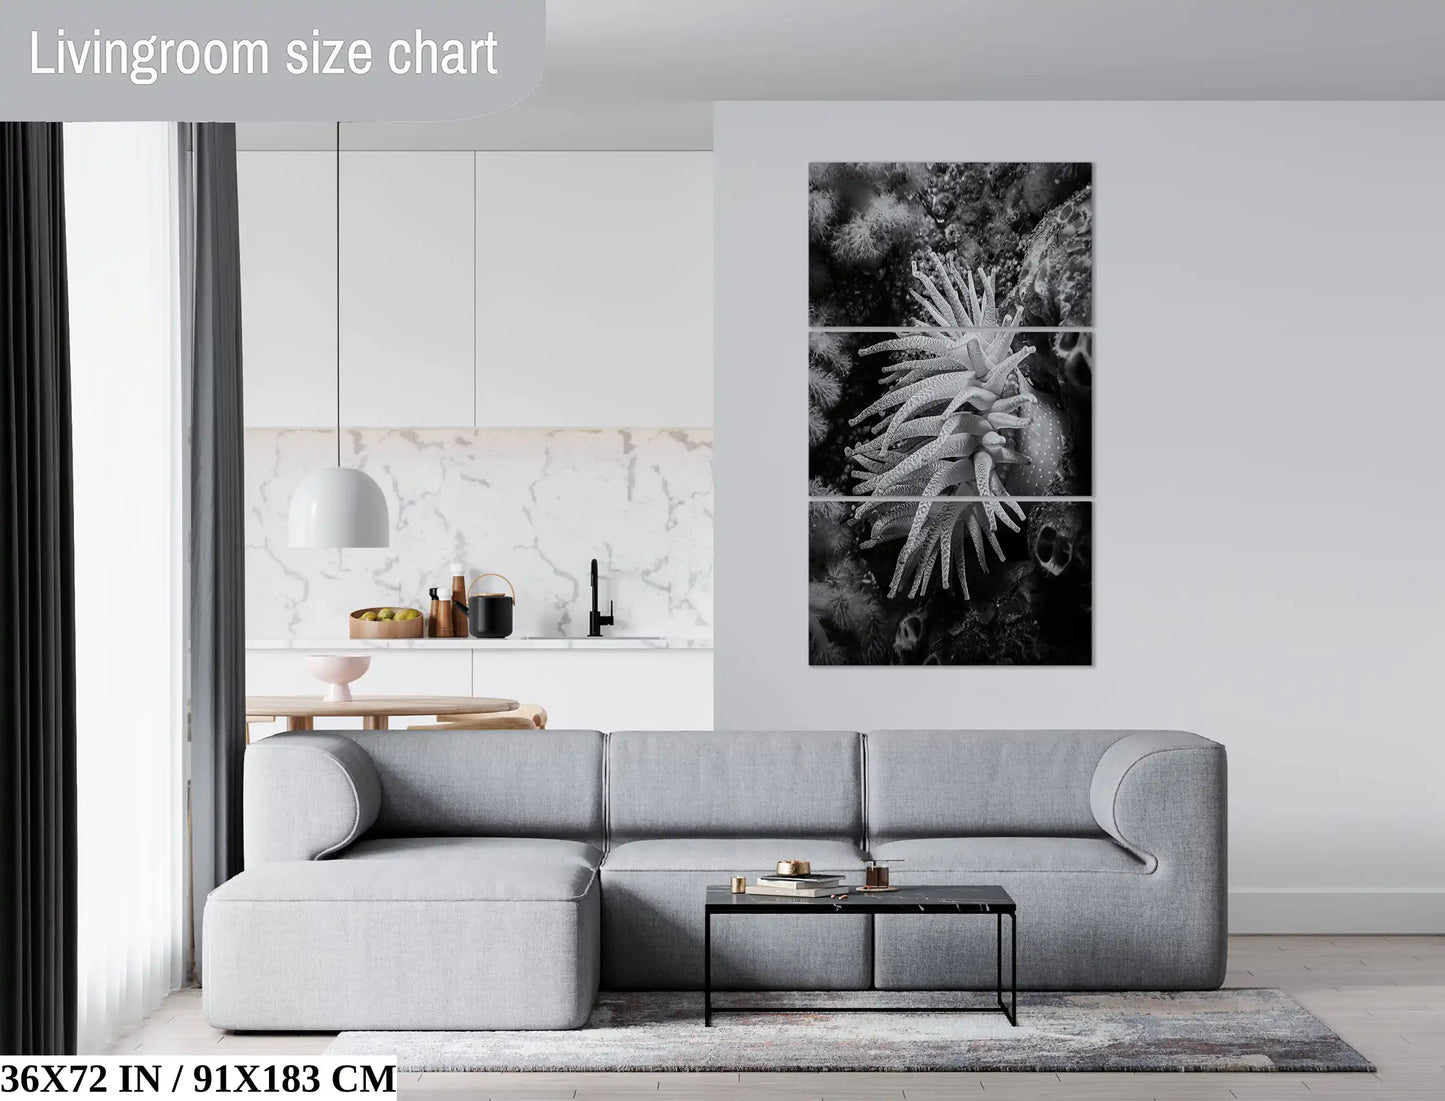 A 36x72 canvas print of a Crimson Anemone in black and white, spanning the wall of a living room for a dramatic visual impact.